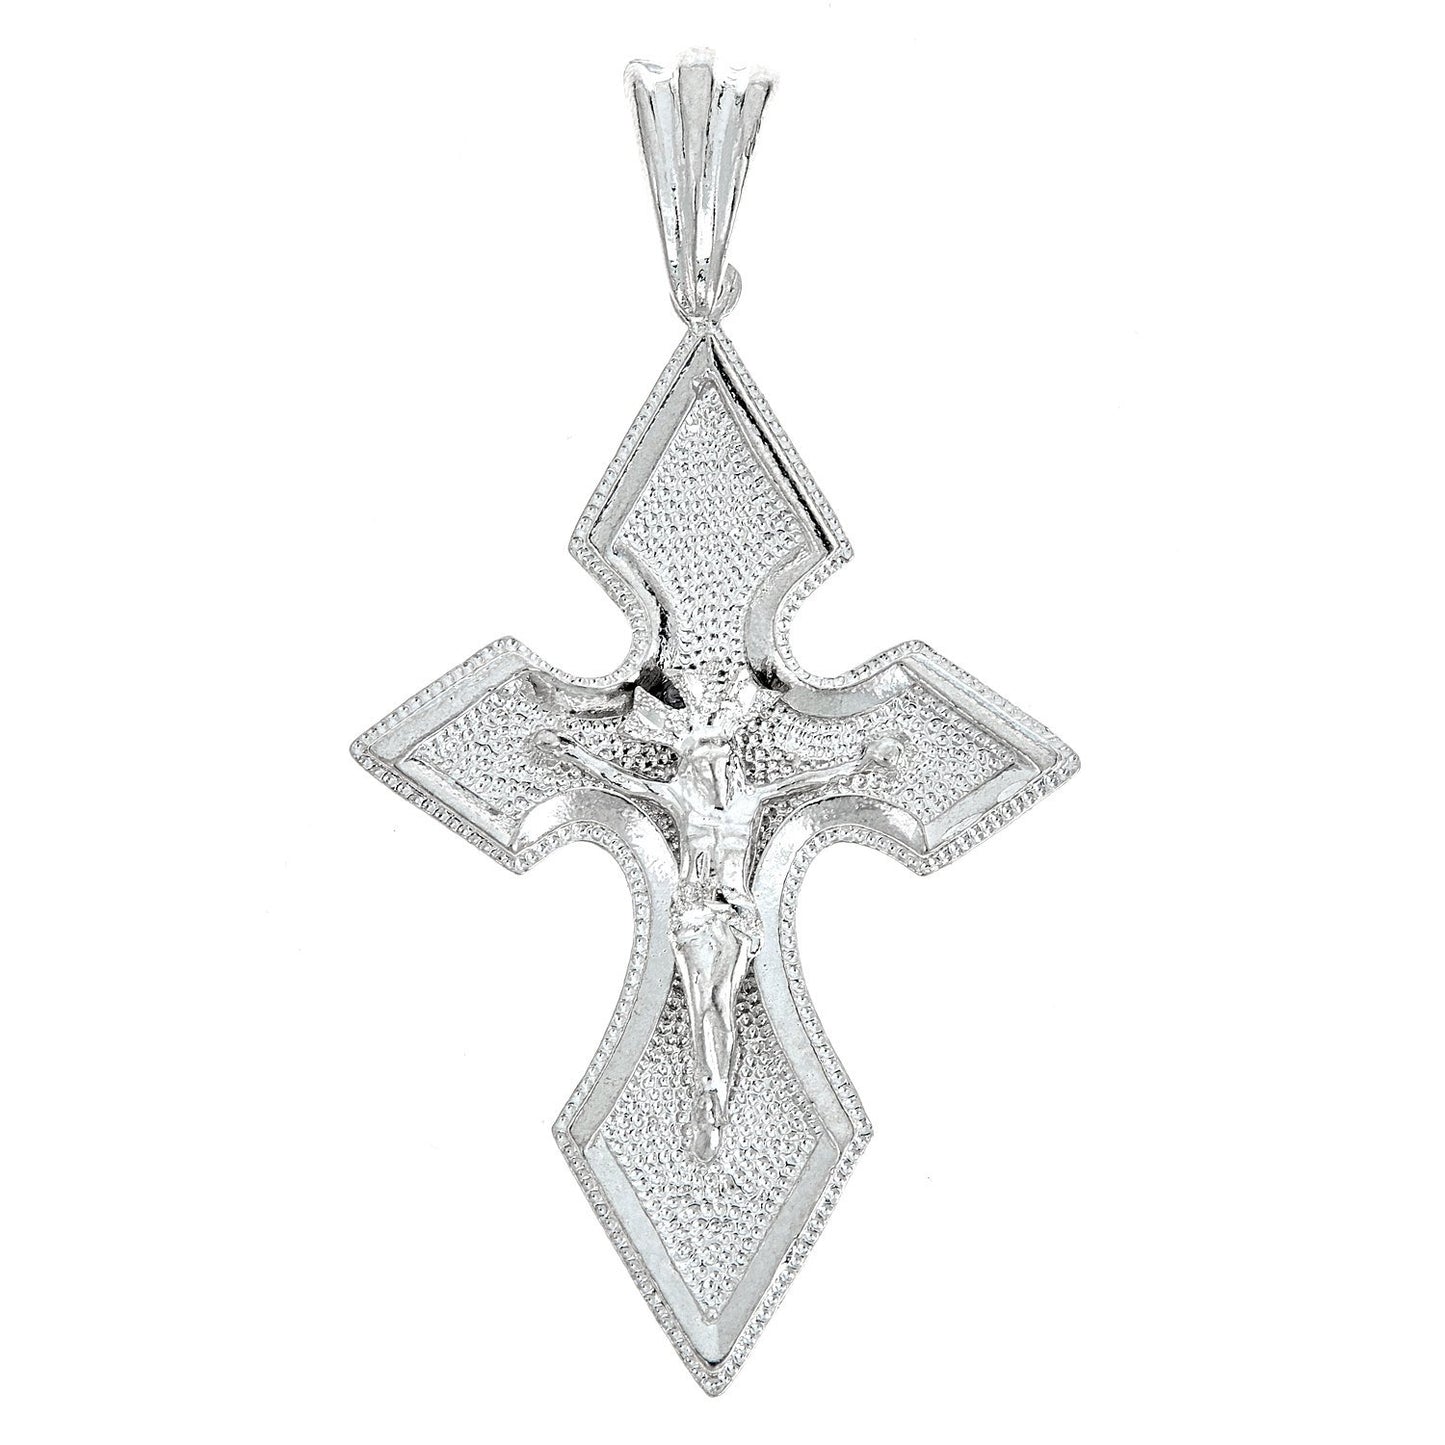 925 Sterling Silver Fuller Shaped Crucifix Pendant -Made in USA (11 grams) - Betterjewelry